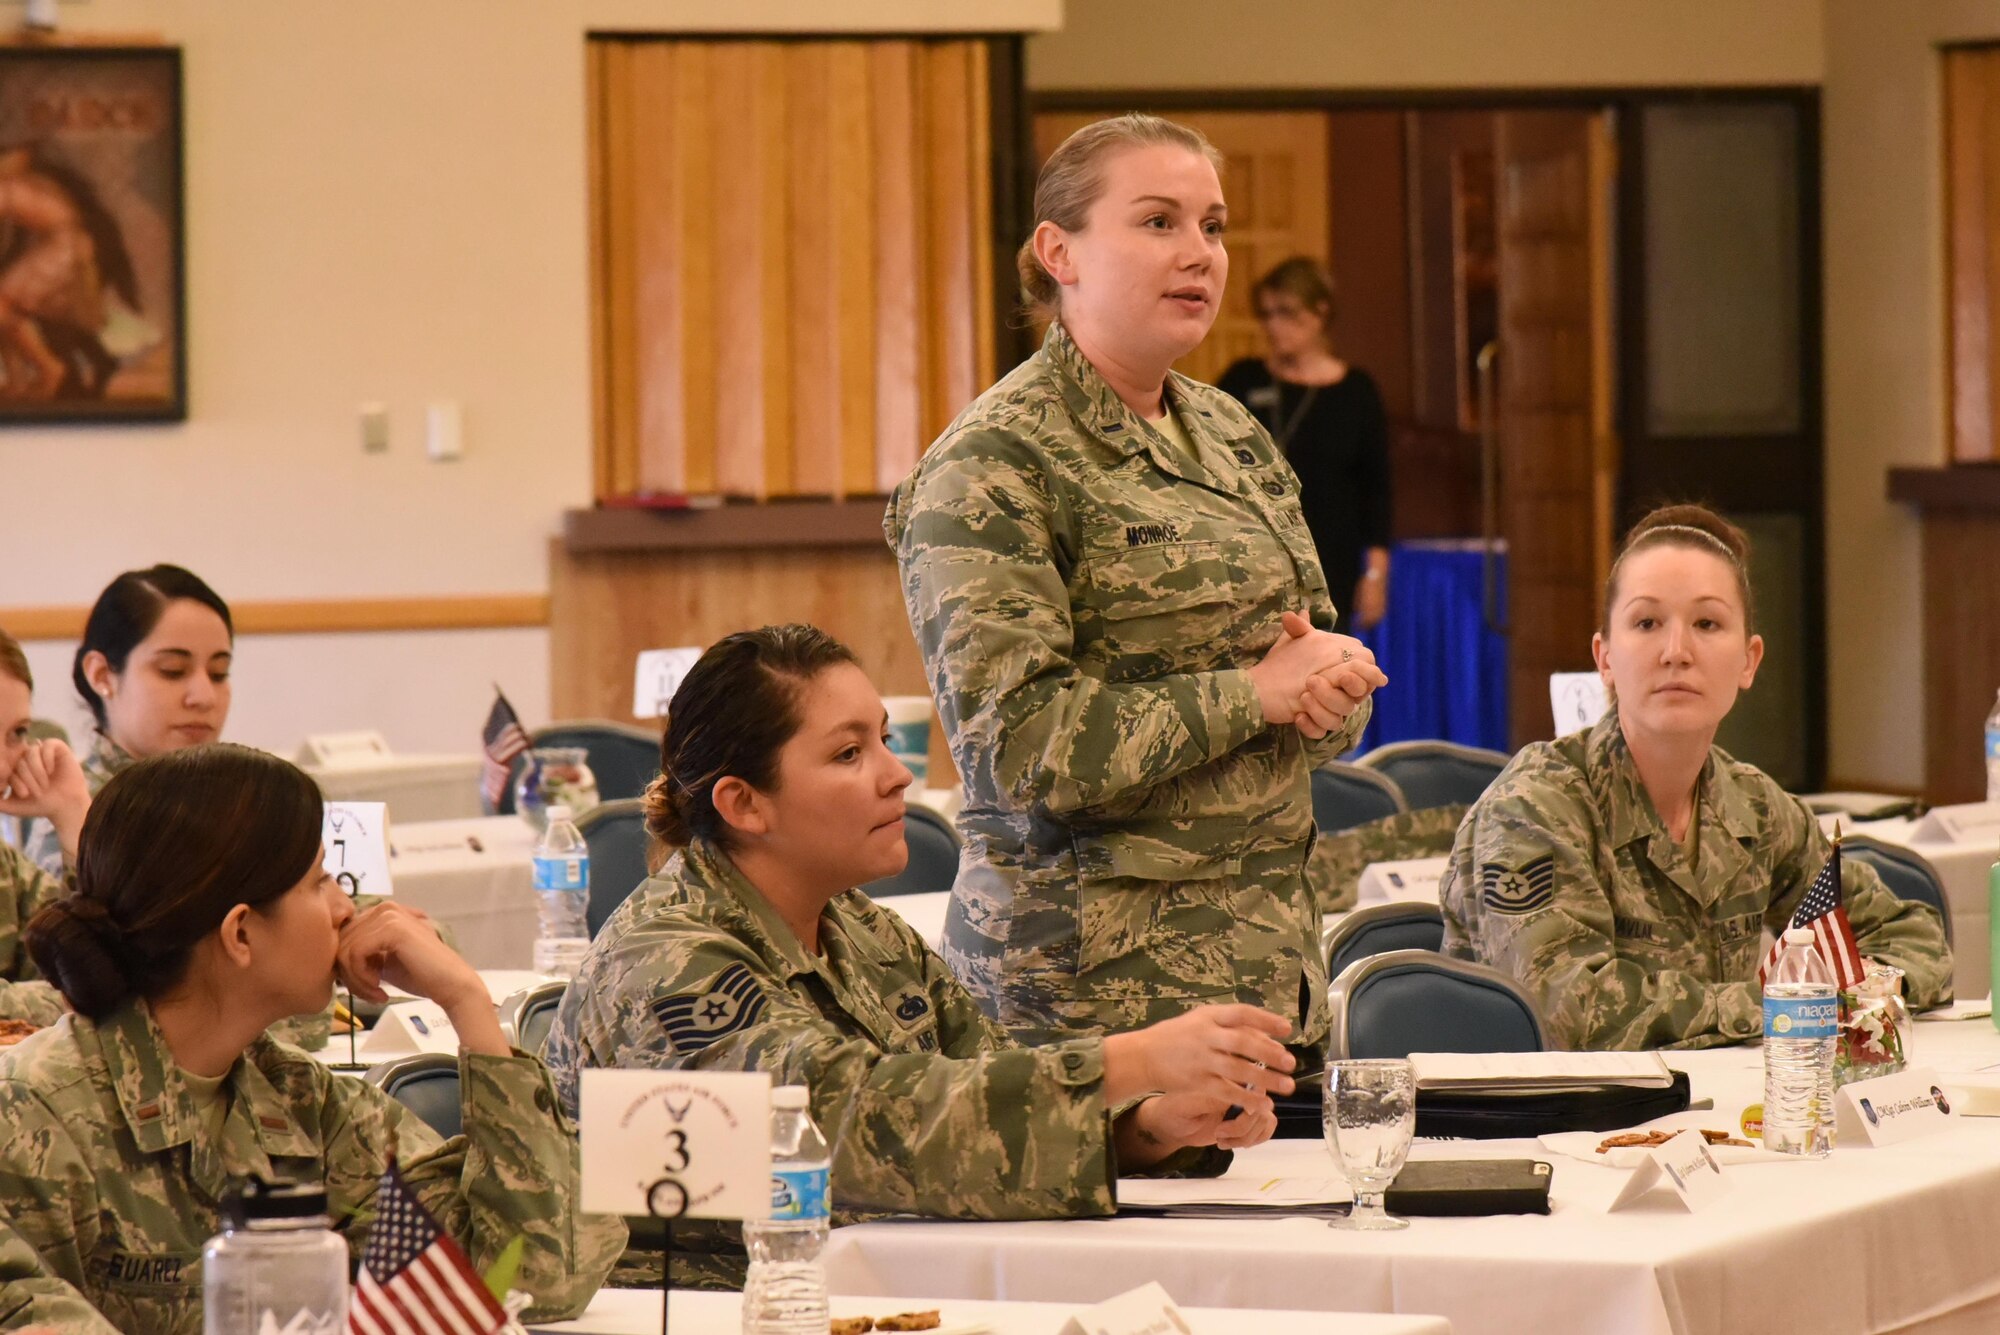 1st Lt. Annabel Monroe, 341st Missile Wing Public Affairs officer, asks a questions during a panel discussion at the second 20th Air Force Women’s Leadership Symposium at Kirtland Air Force Base, N.M., Sept. 28, 2016. Both men and women attended this year and gained insight into career decisions and lessons learned from top military leaders. The three-day event supports 20th AF’s goal to coach, train and mentor nuclear professionals and leaders, while developing a nuclear command environment that fosters understanding, respect and the support necessary for people to thrive. (U.S. Air Force photo by Ken Moore)